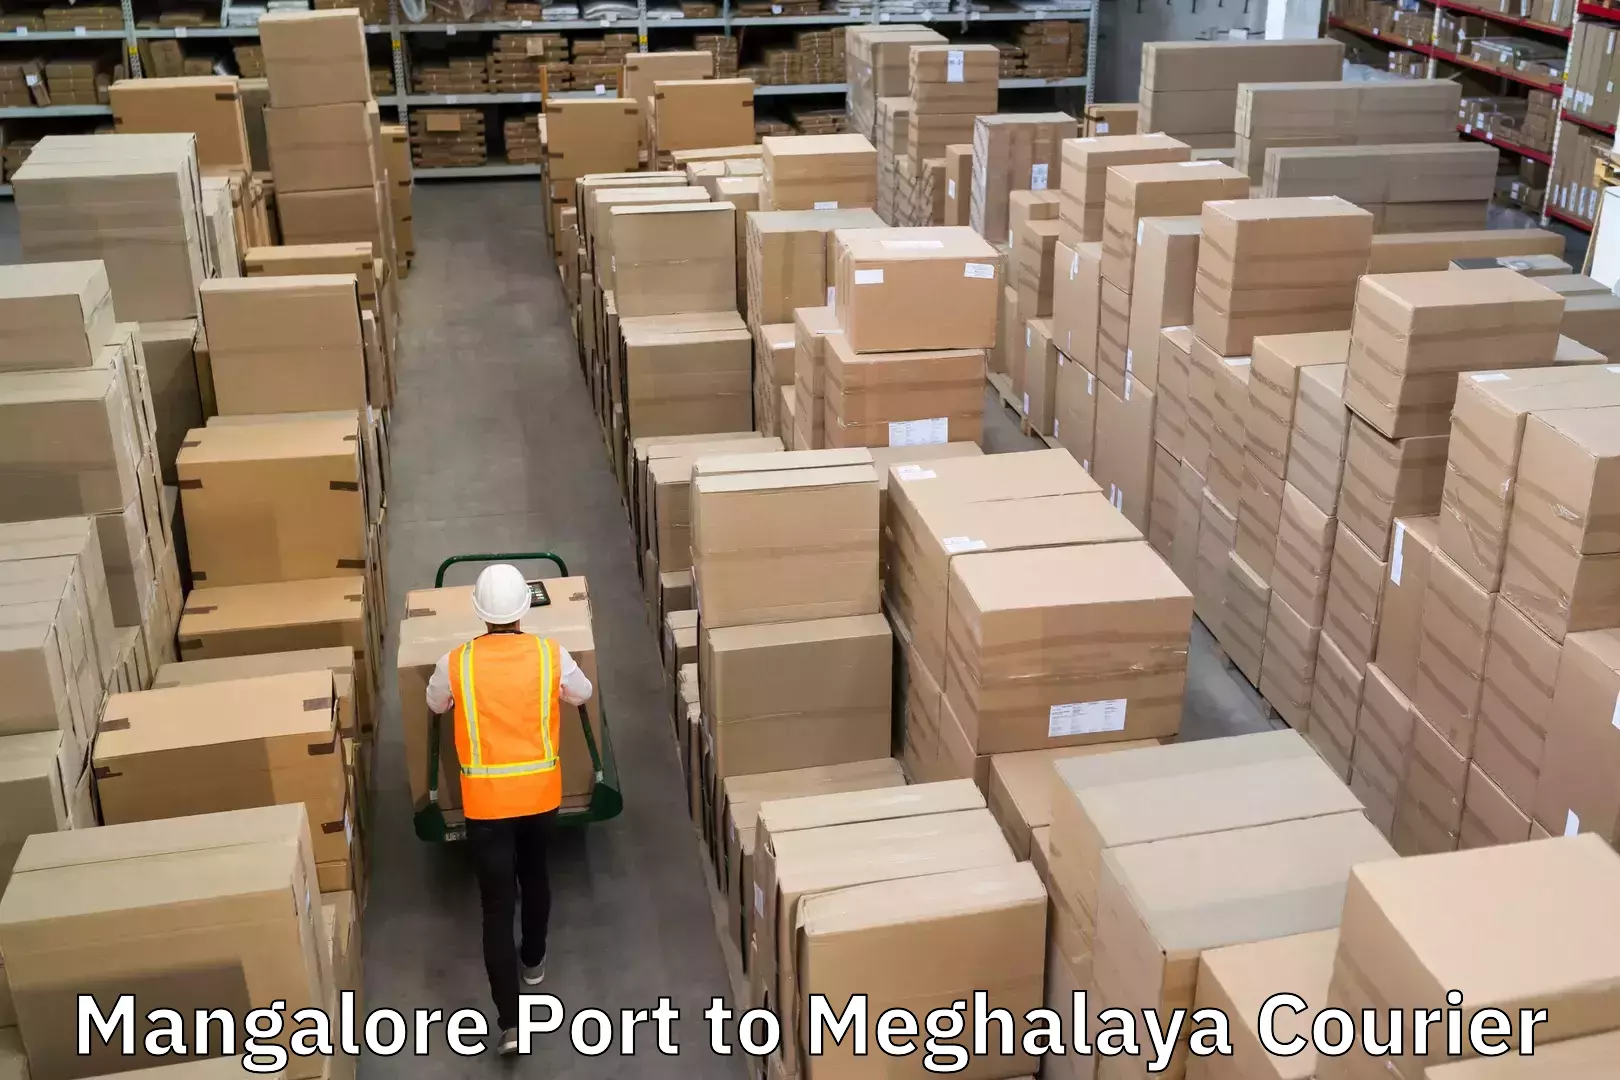 Specialized courier services Mangalore Port to Meghalaya